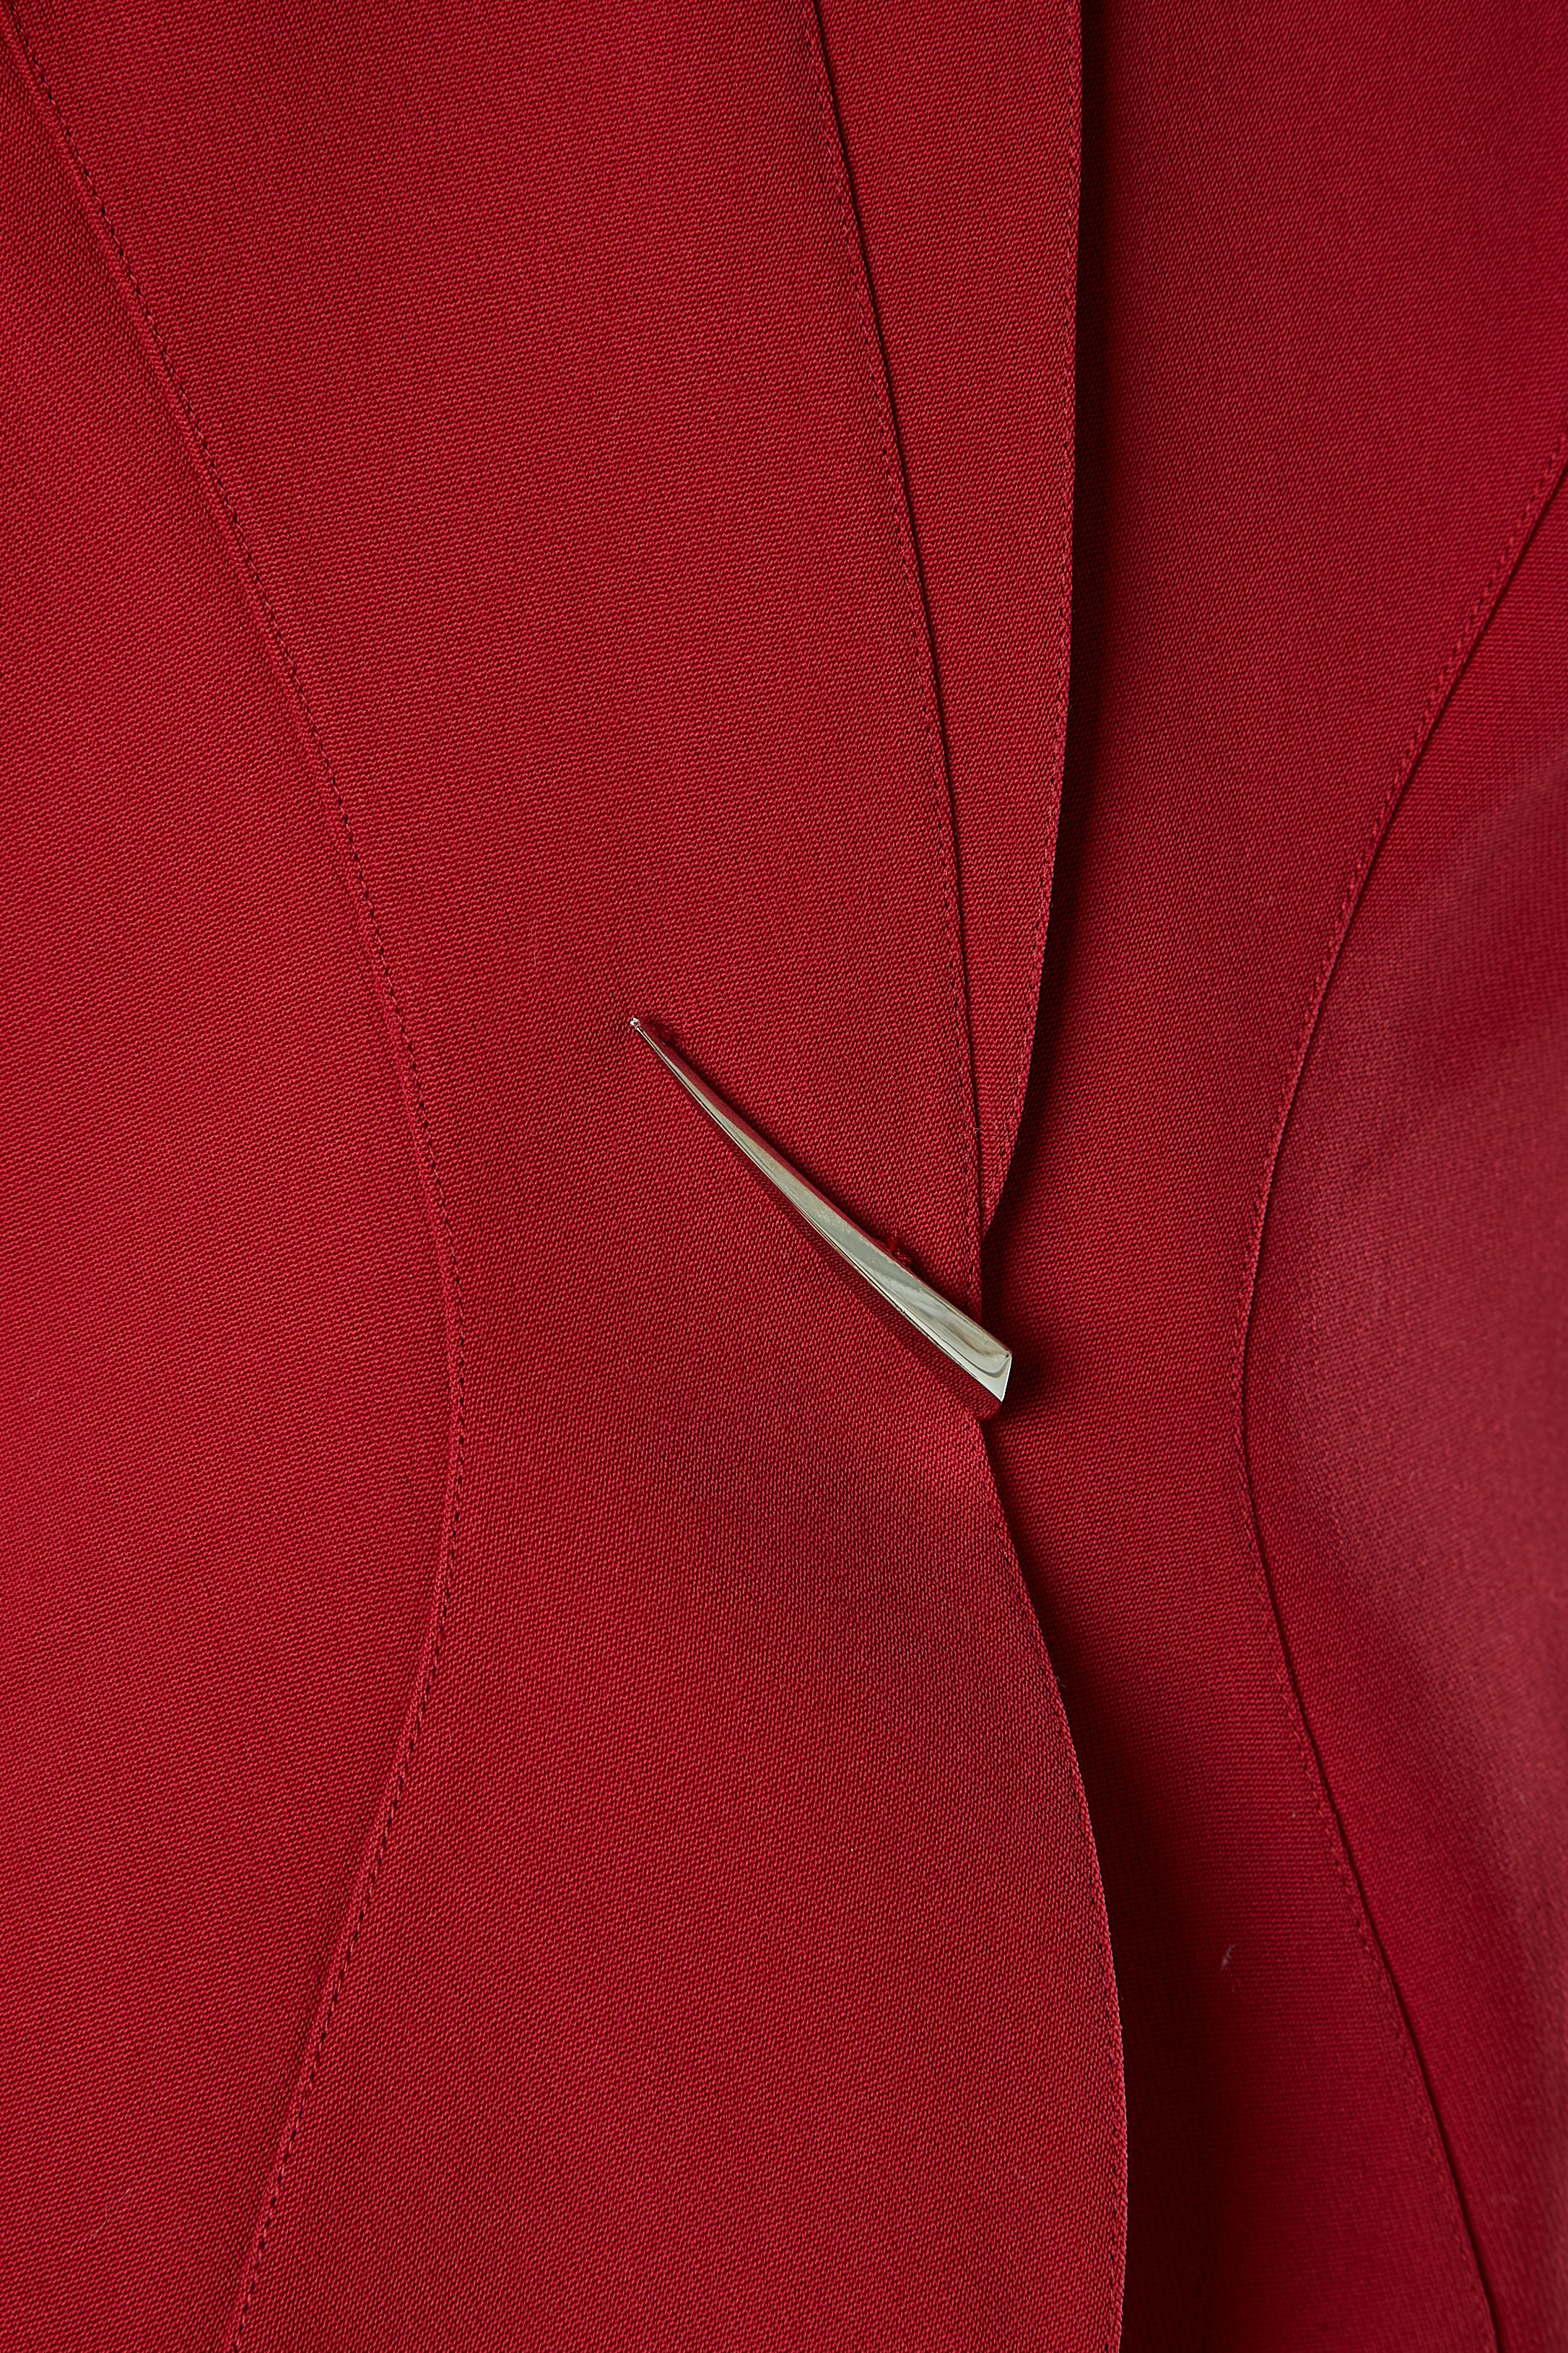 Wool burgundy skirt suit with silver claws Thierry Mugler Circa 1980's  In Excellent Condition For Sale In Saint-Ouen-Sur-Seine, FR